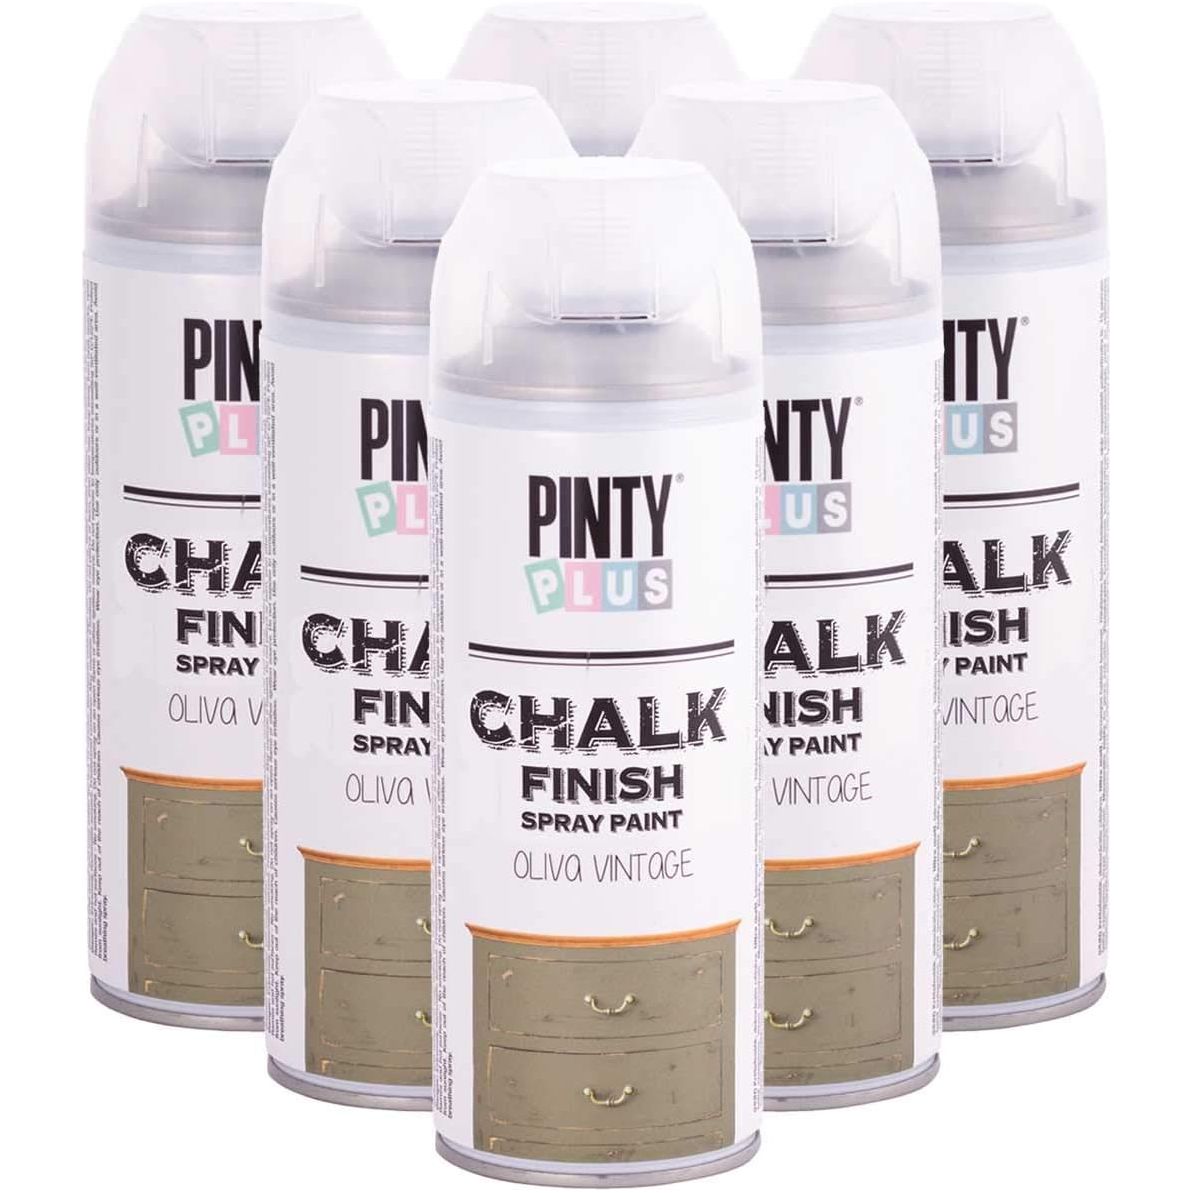 Olive Chalk Finish Spray Paint Pintyplus | 6 Cans - South East Clearance Centre